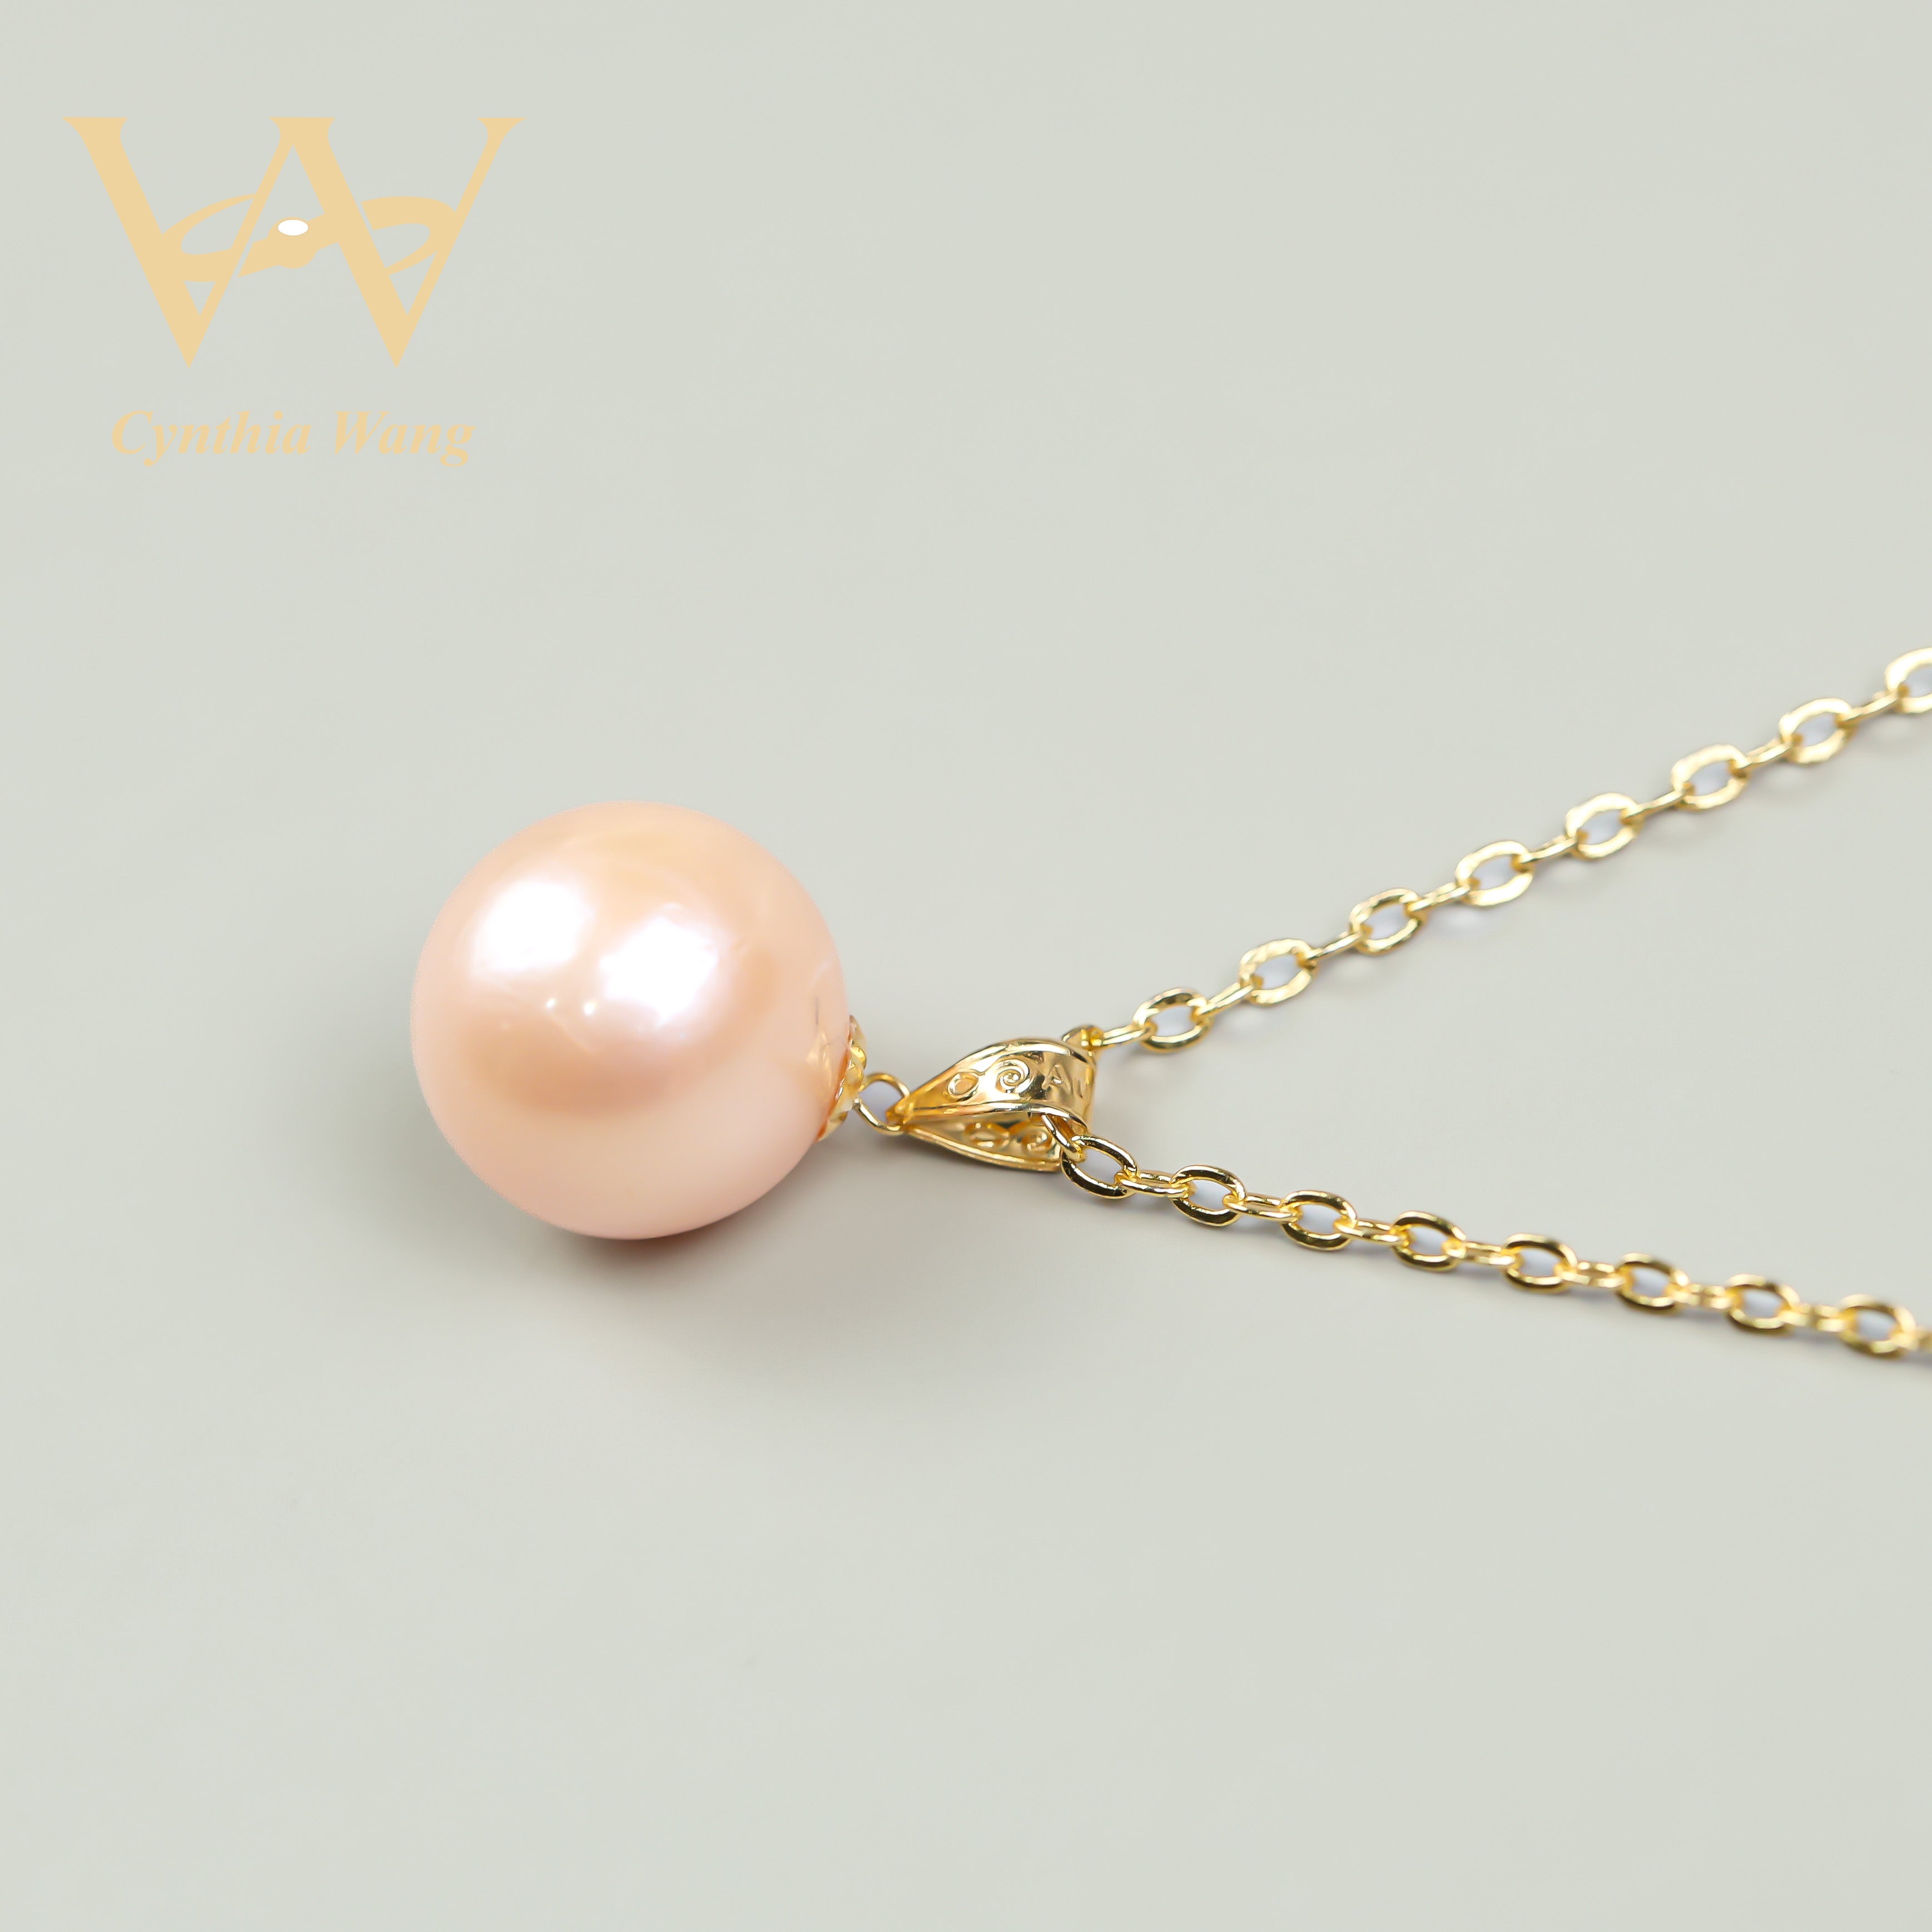 'Elegance Collection' Trio of 9-11mm Champagne Ediron Pearls in Gorgeous Hues